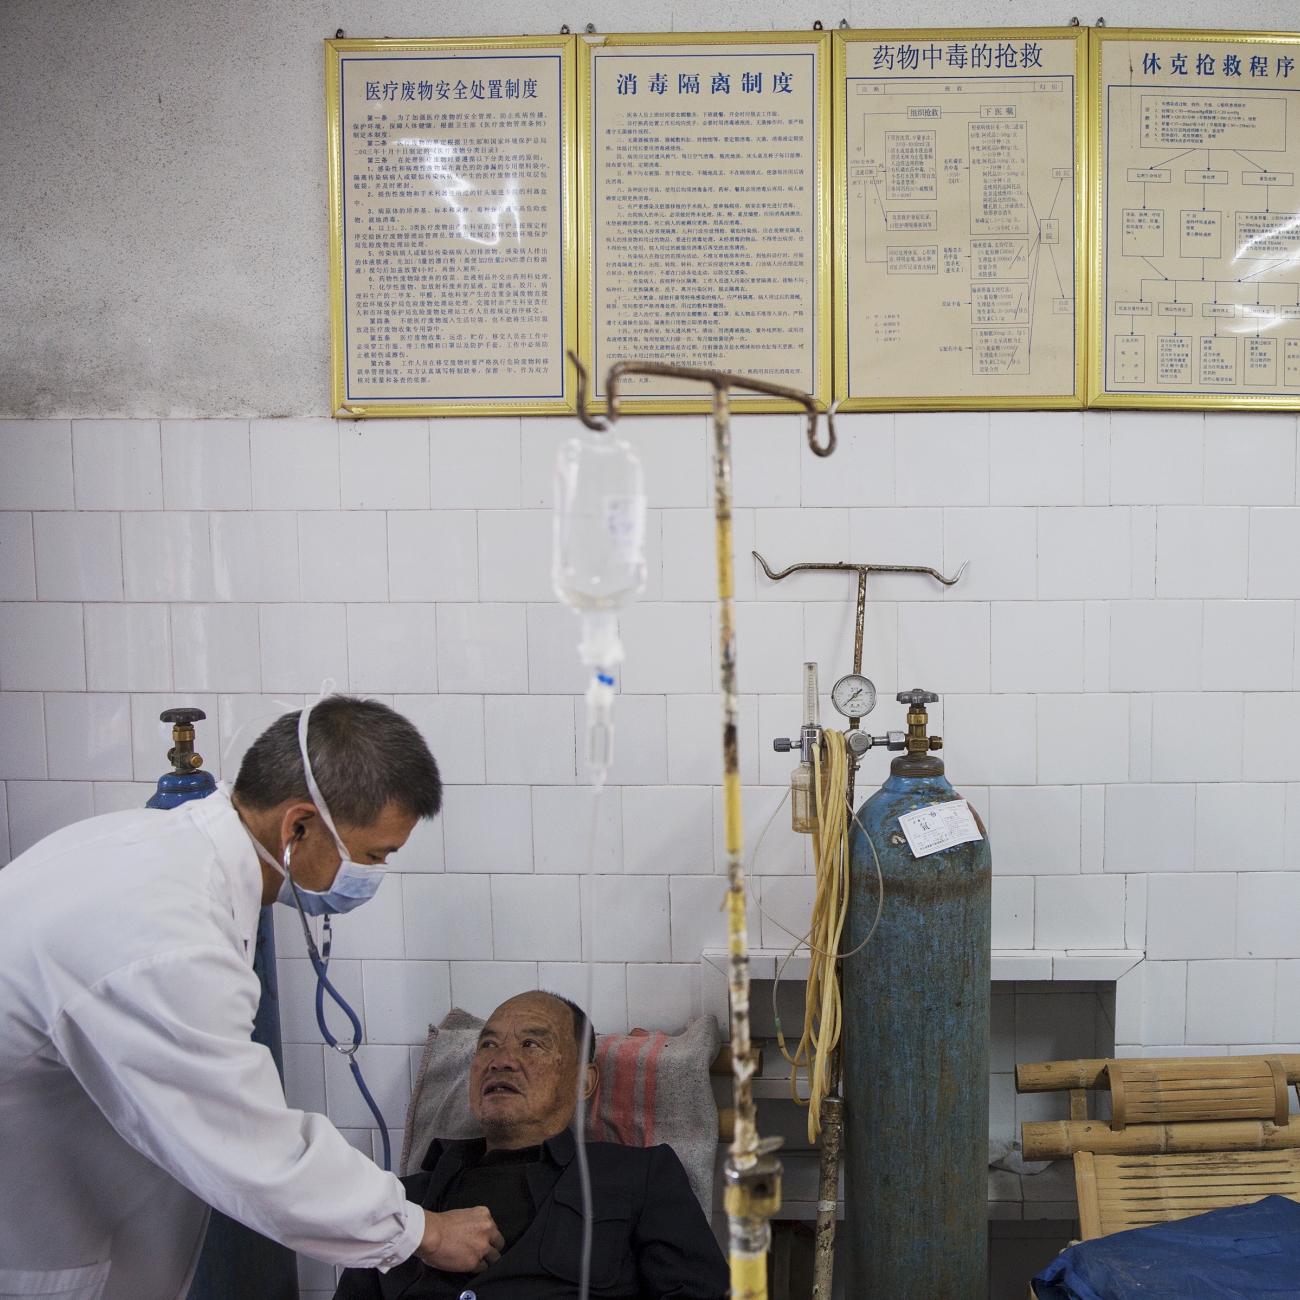 A doctor checks a patient in the hospital in Wuyi County, Zhejiang Province, China, on October 19, 2015. REUTERS/Damir Sagolj